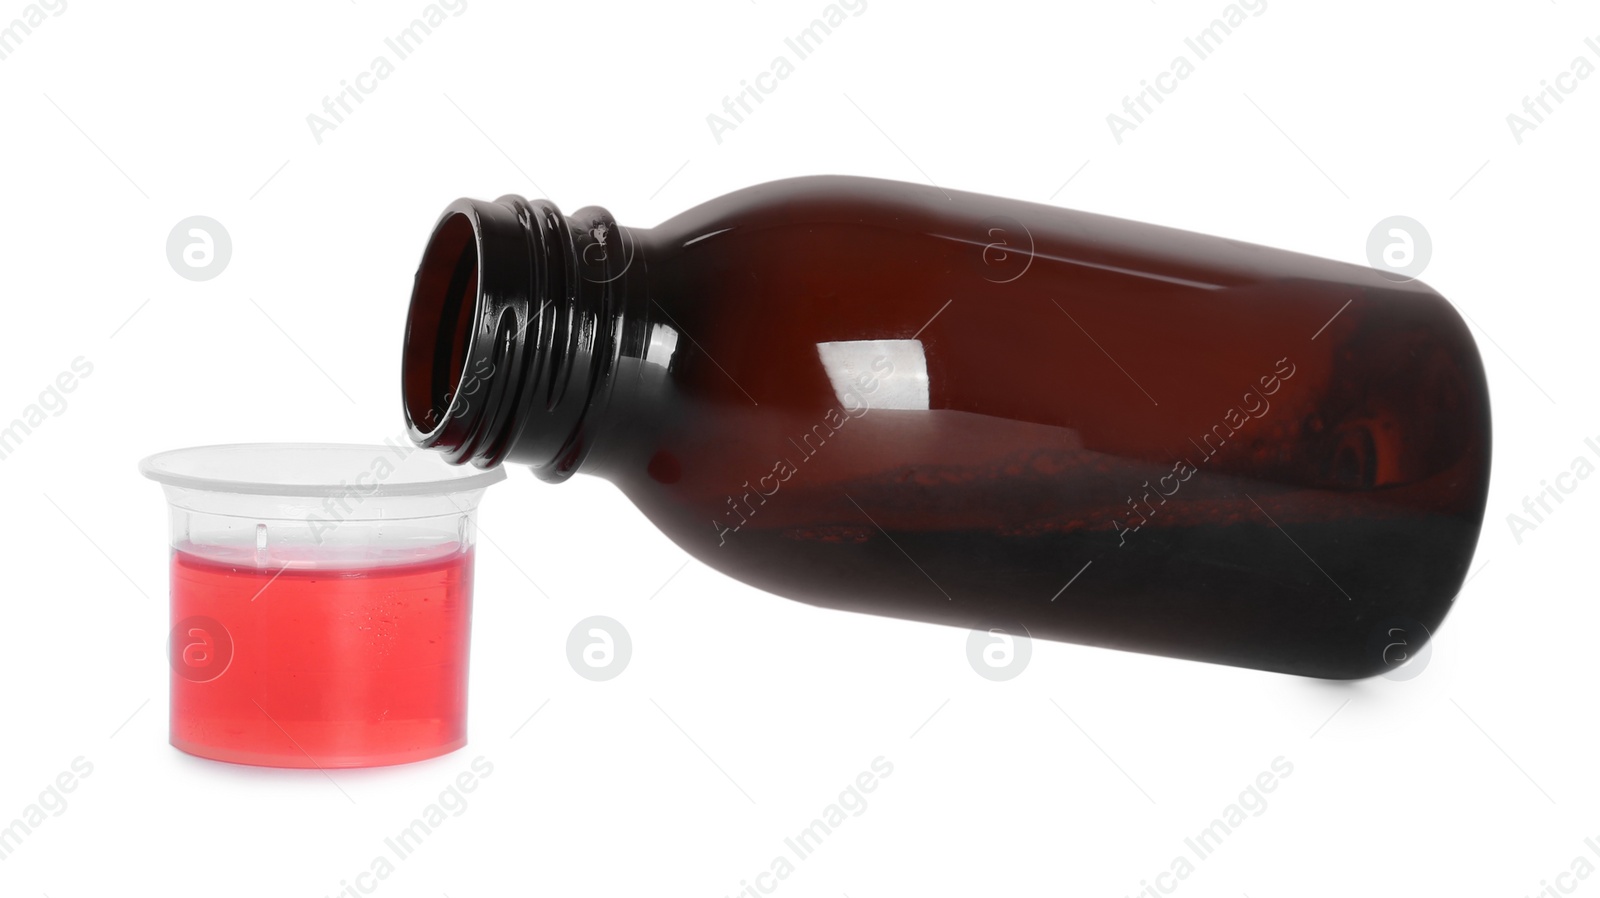 Photo of Bottle of cough syrup and measuring cup on white background